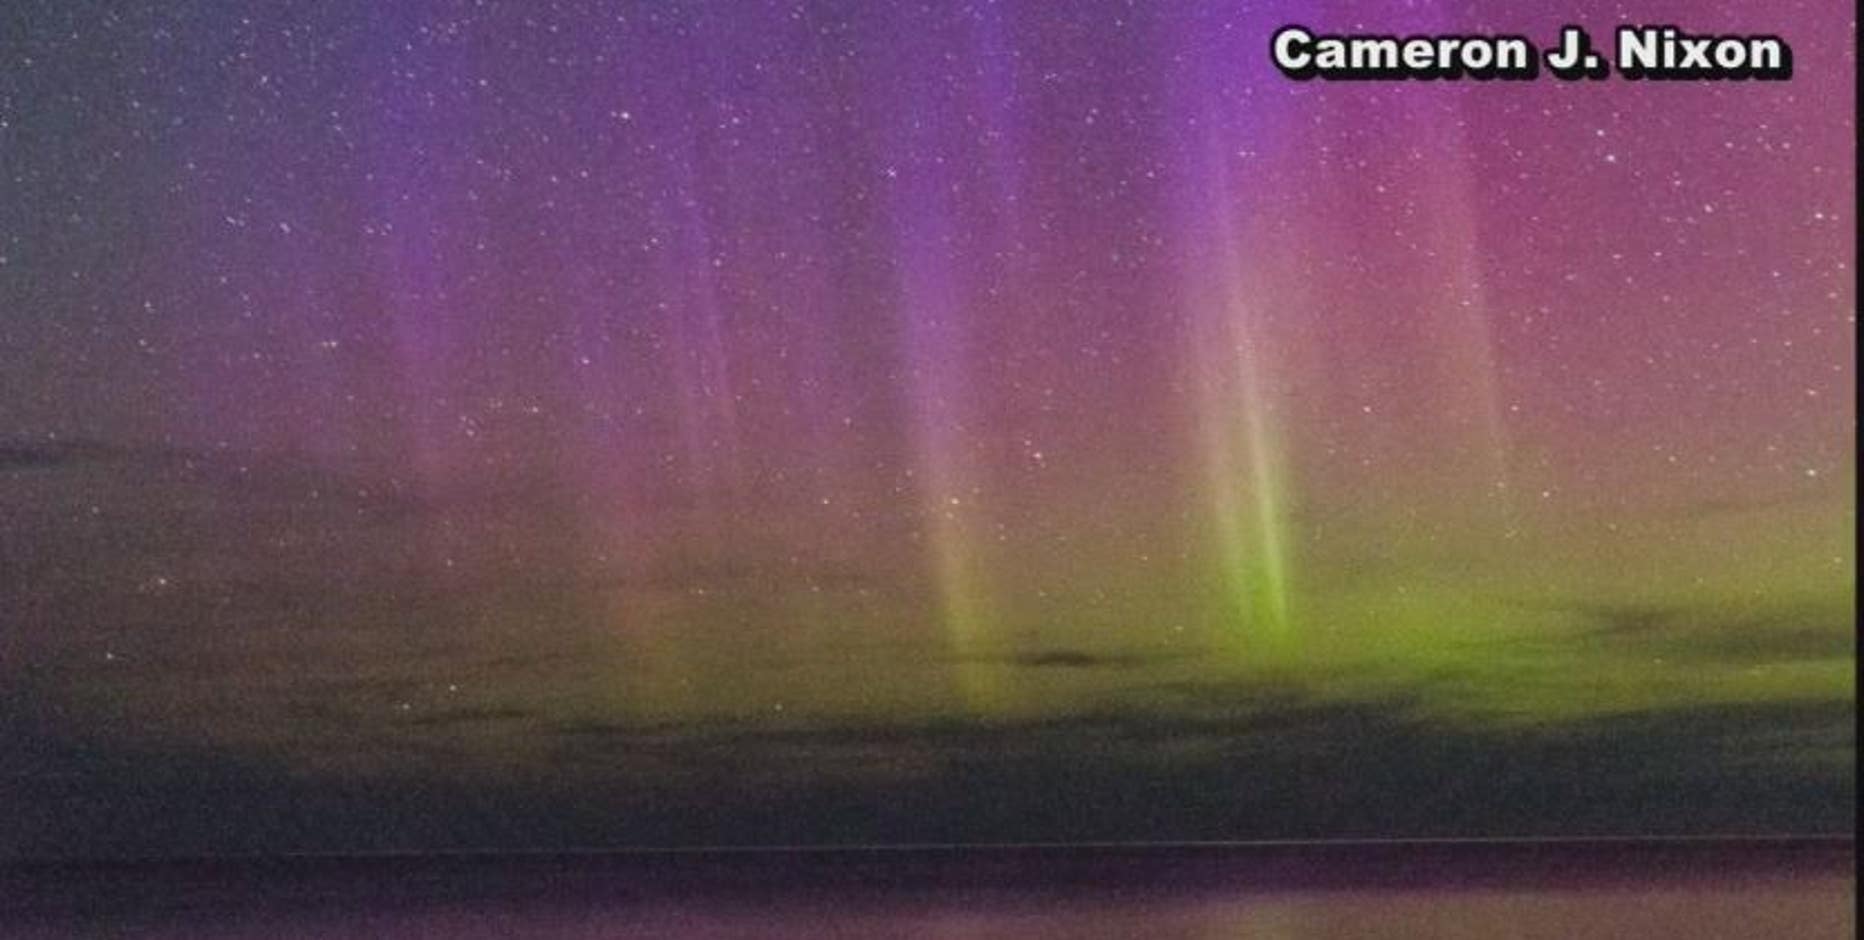 Northern lights visible in Michigan Thursday night, space forecasters say